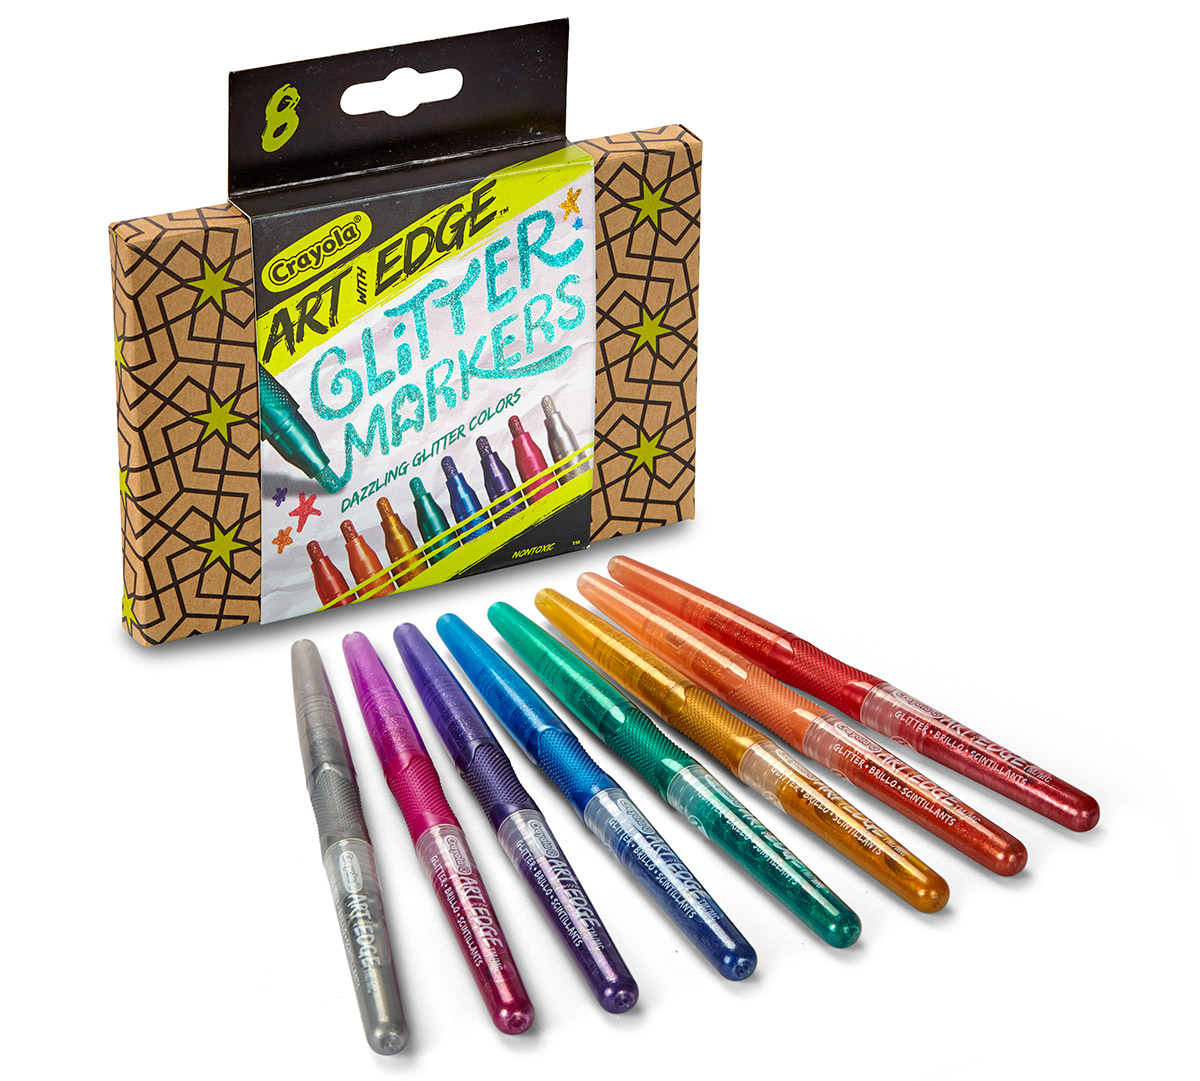 Download Crayola Art With Edge, Glitter Markers, 8 count, Art Tools, Coloring for Everyone!, Great with ...